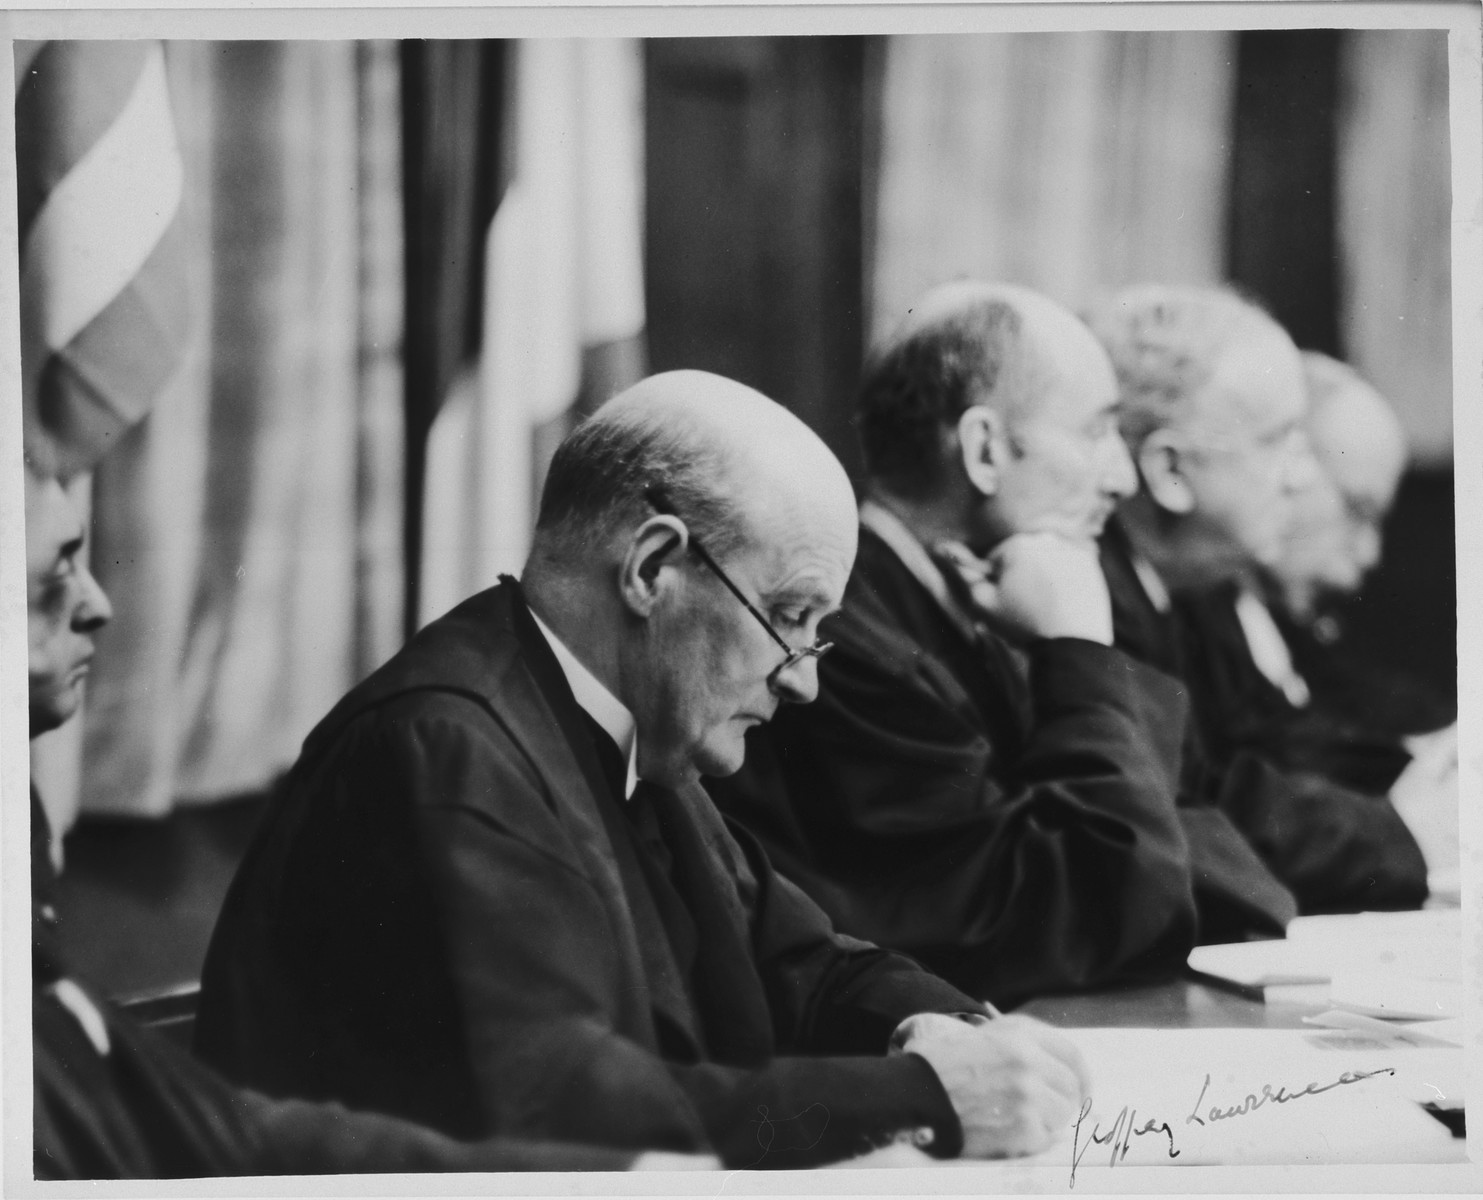 Presiding judge, Sir Geoffrey Lawrence, KC, sits on the bench during a session of the International Military Tribunal trial of war criminals at Nuremberg.

Visible in the background are Judge Francis Biddle, Justice John L. Parker and Justice Donnedieu de Varbes.